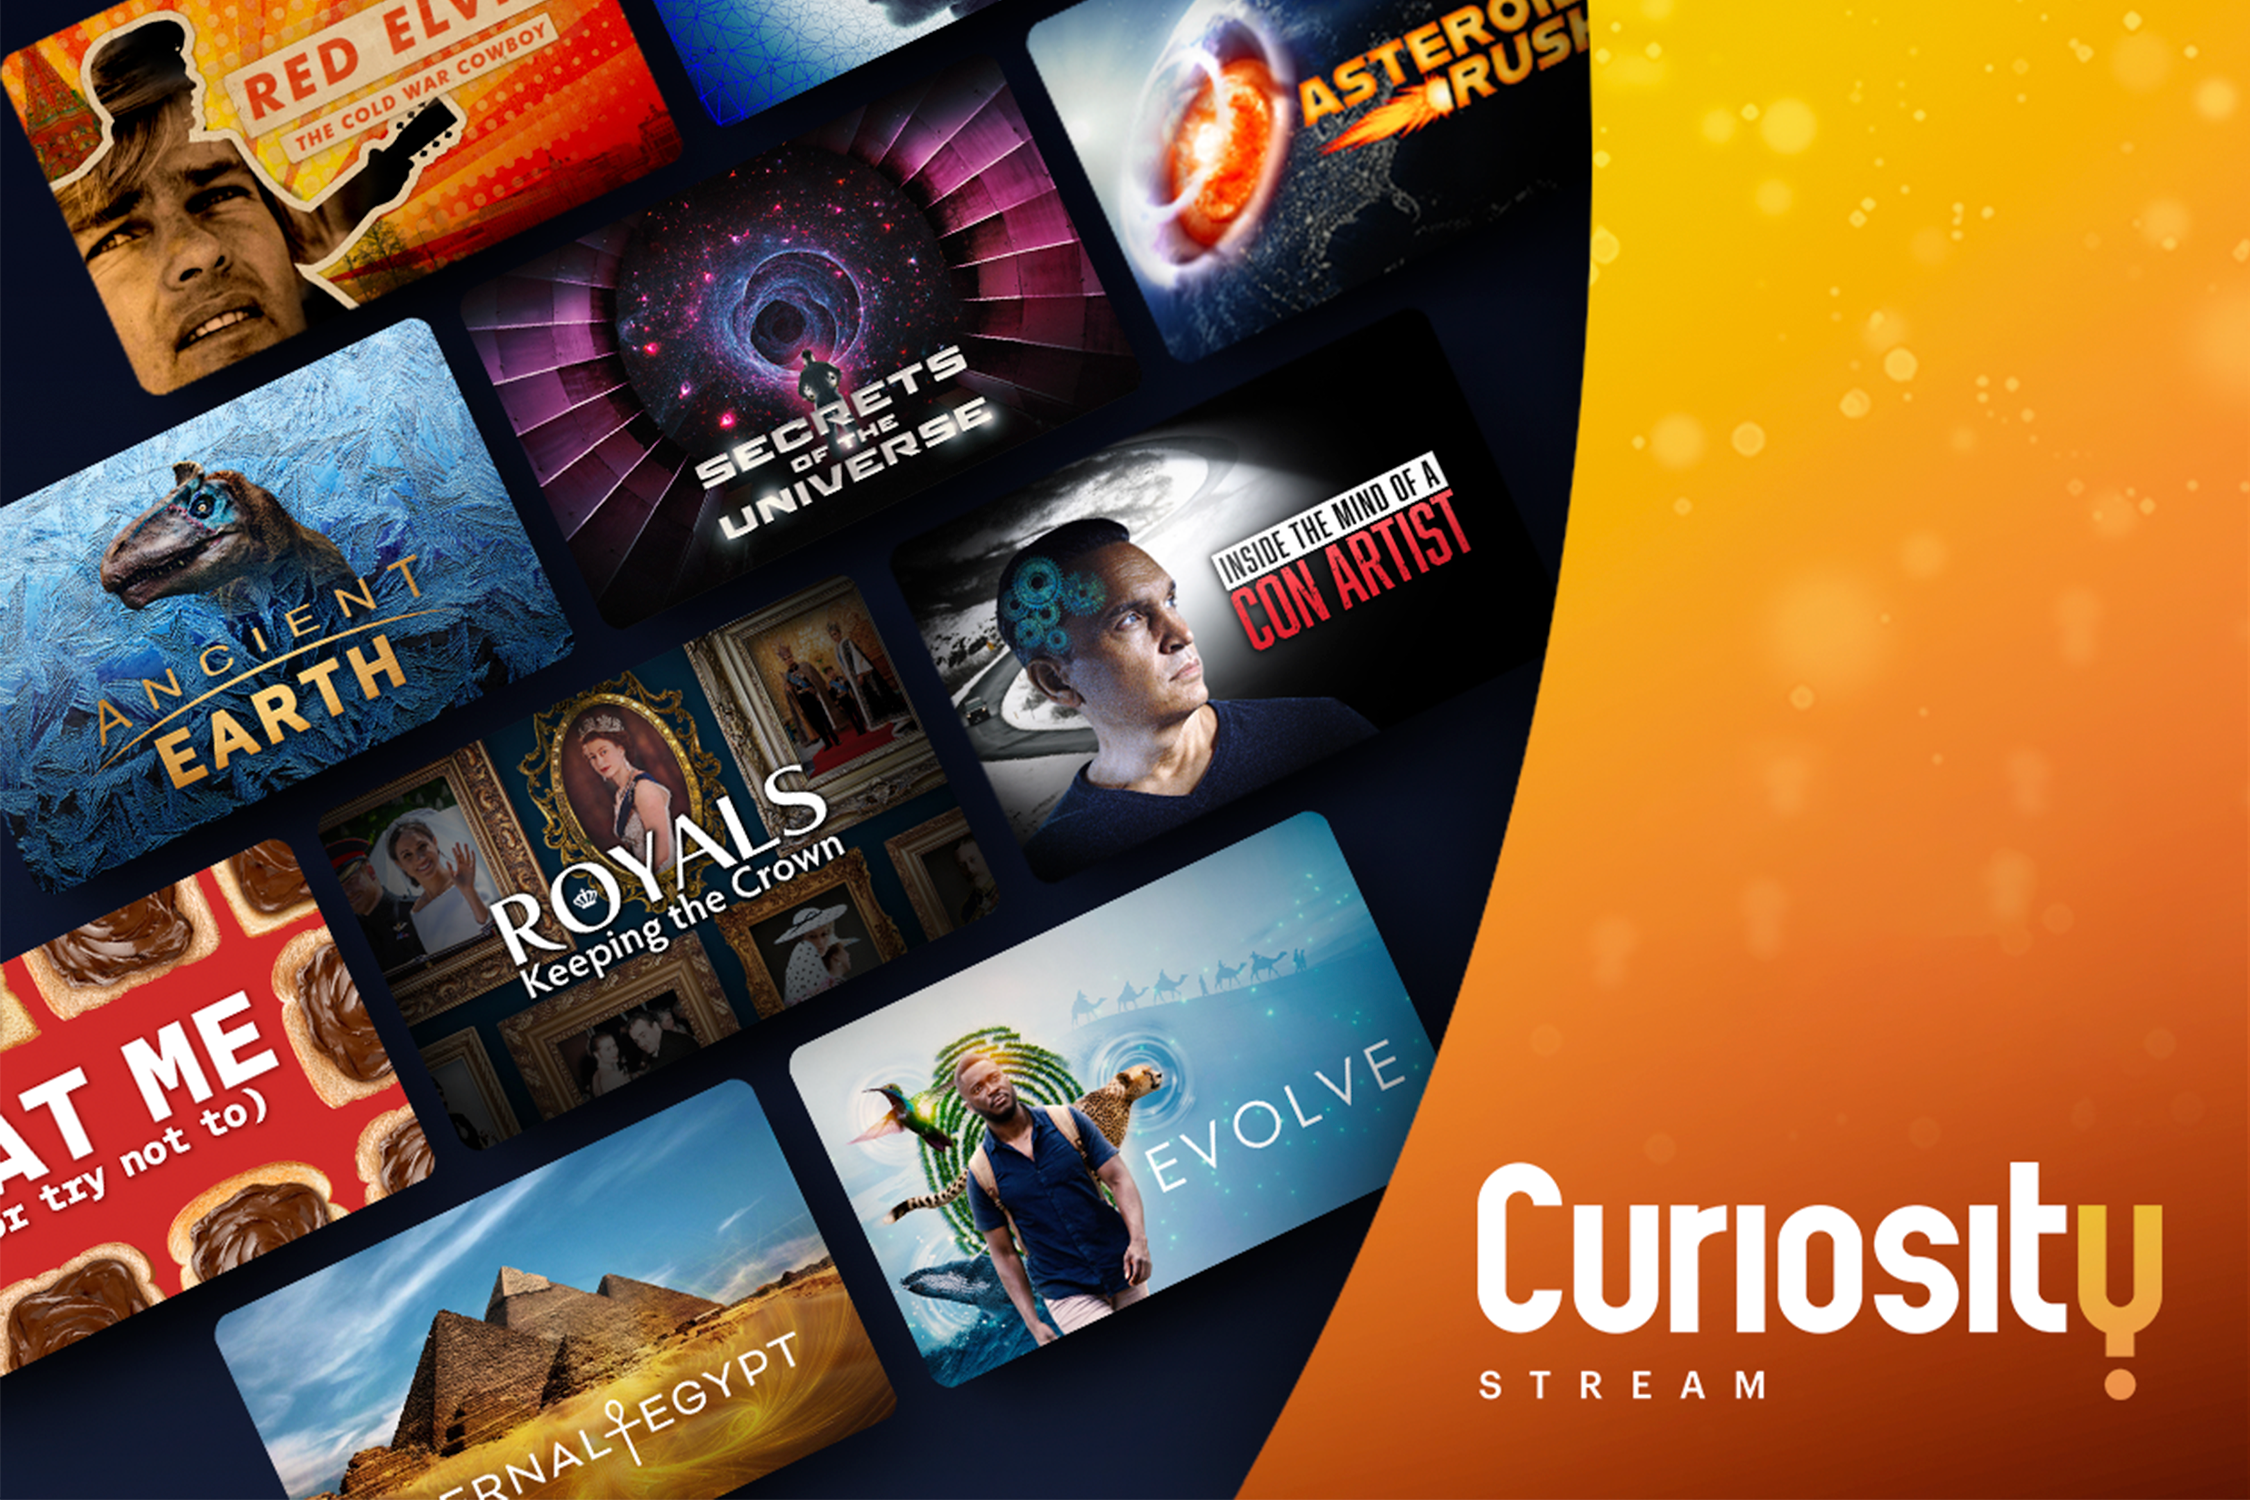 Get Curiosity Stream for life at $180 with this limited-time, best-on-web deal